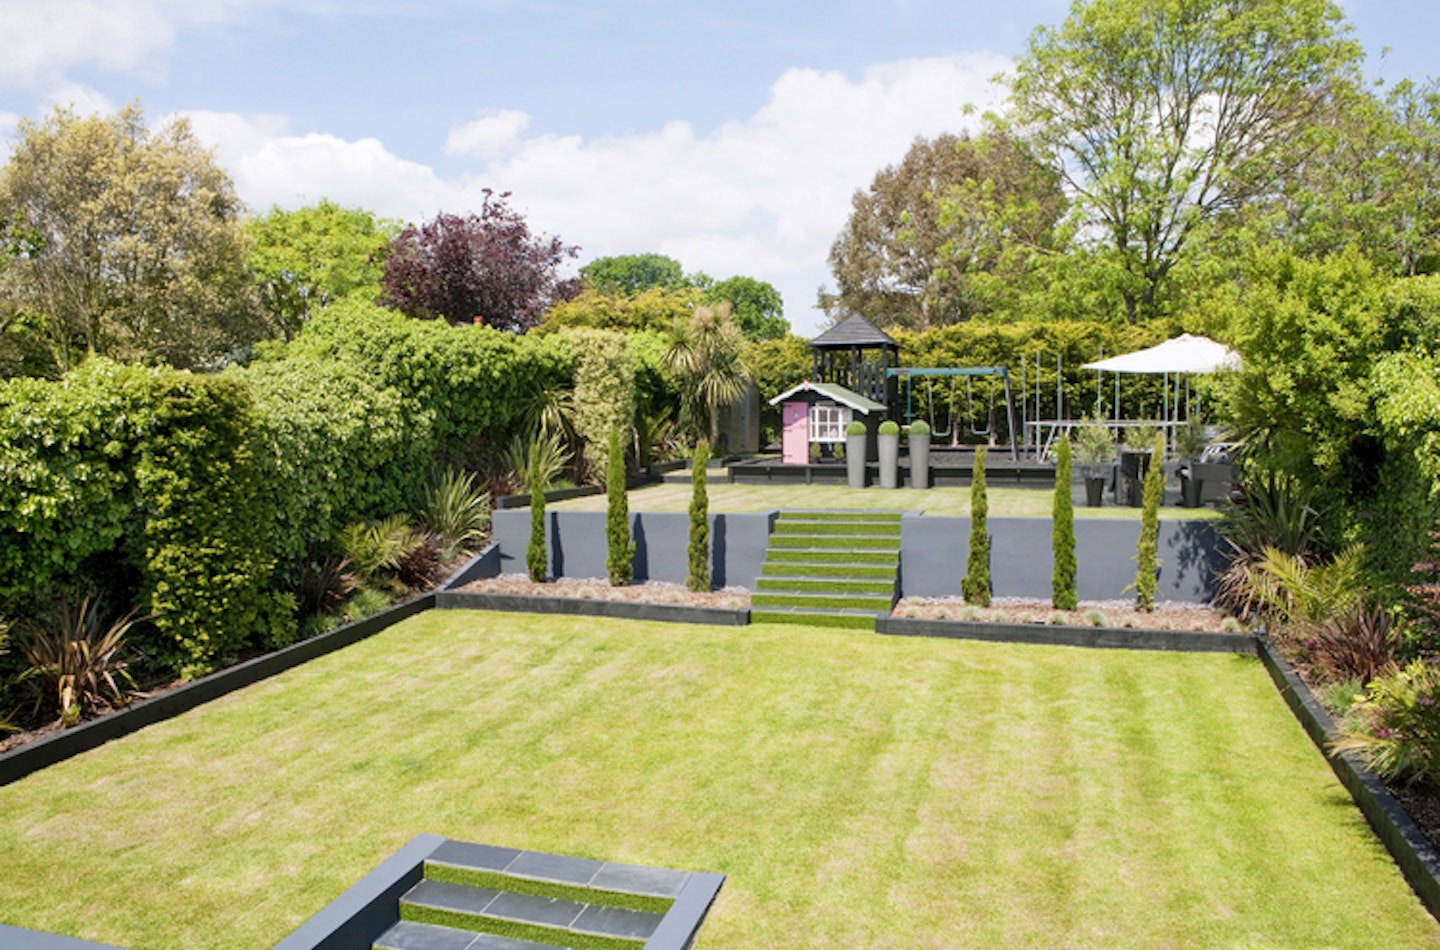 Garden Designs | "Tiers Transformed Our Dull 80s Plot"